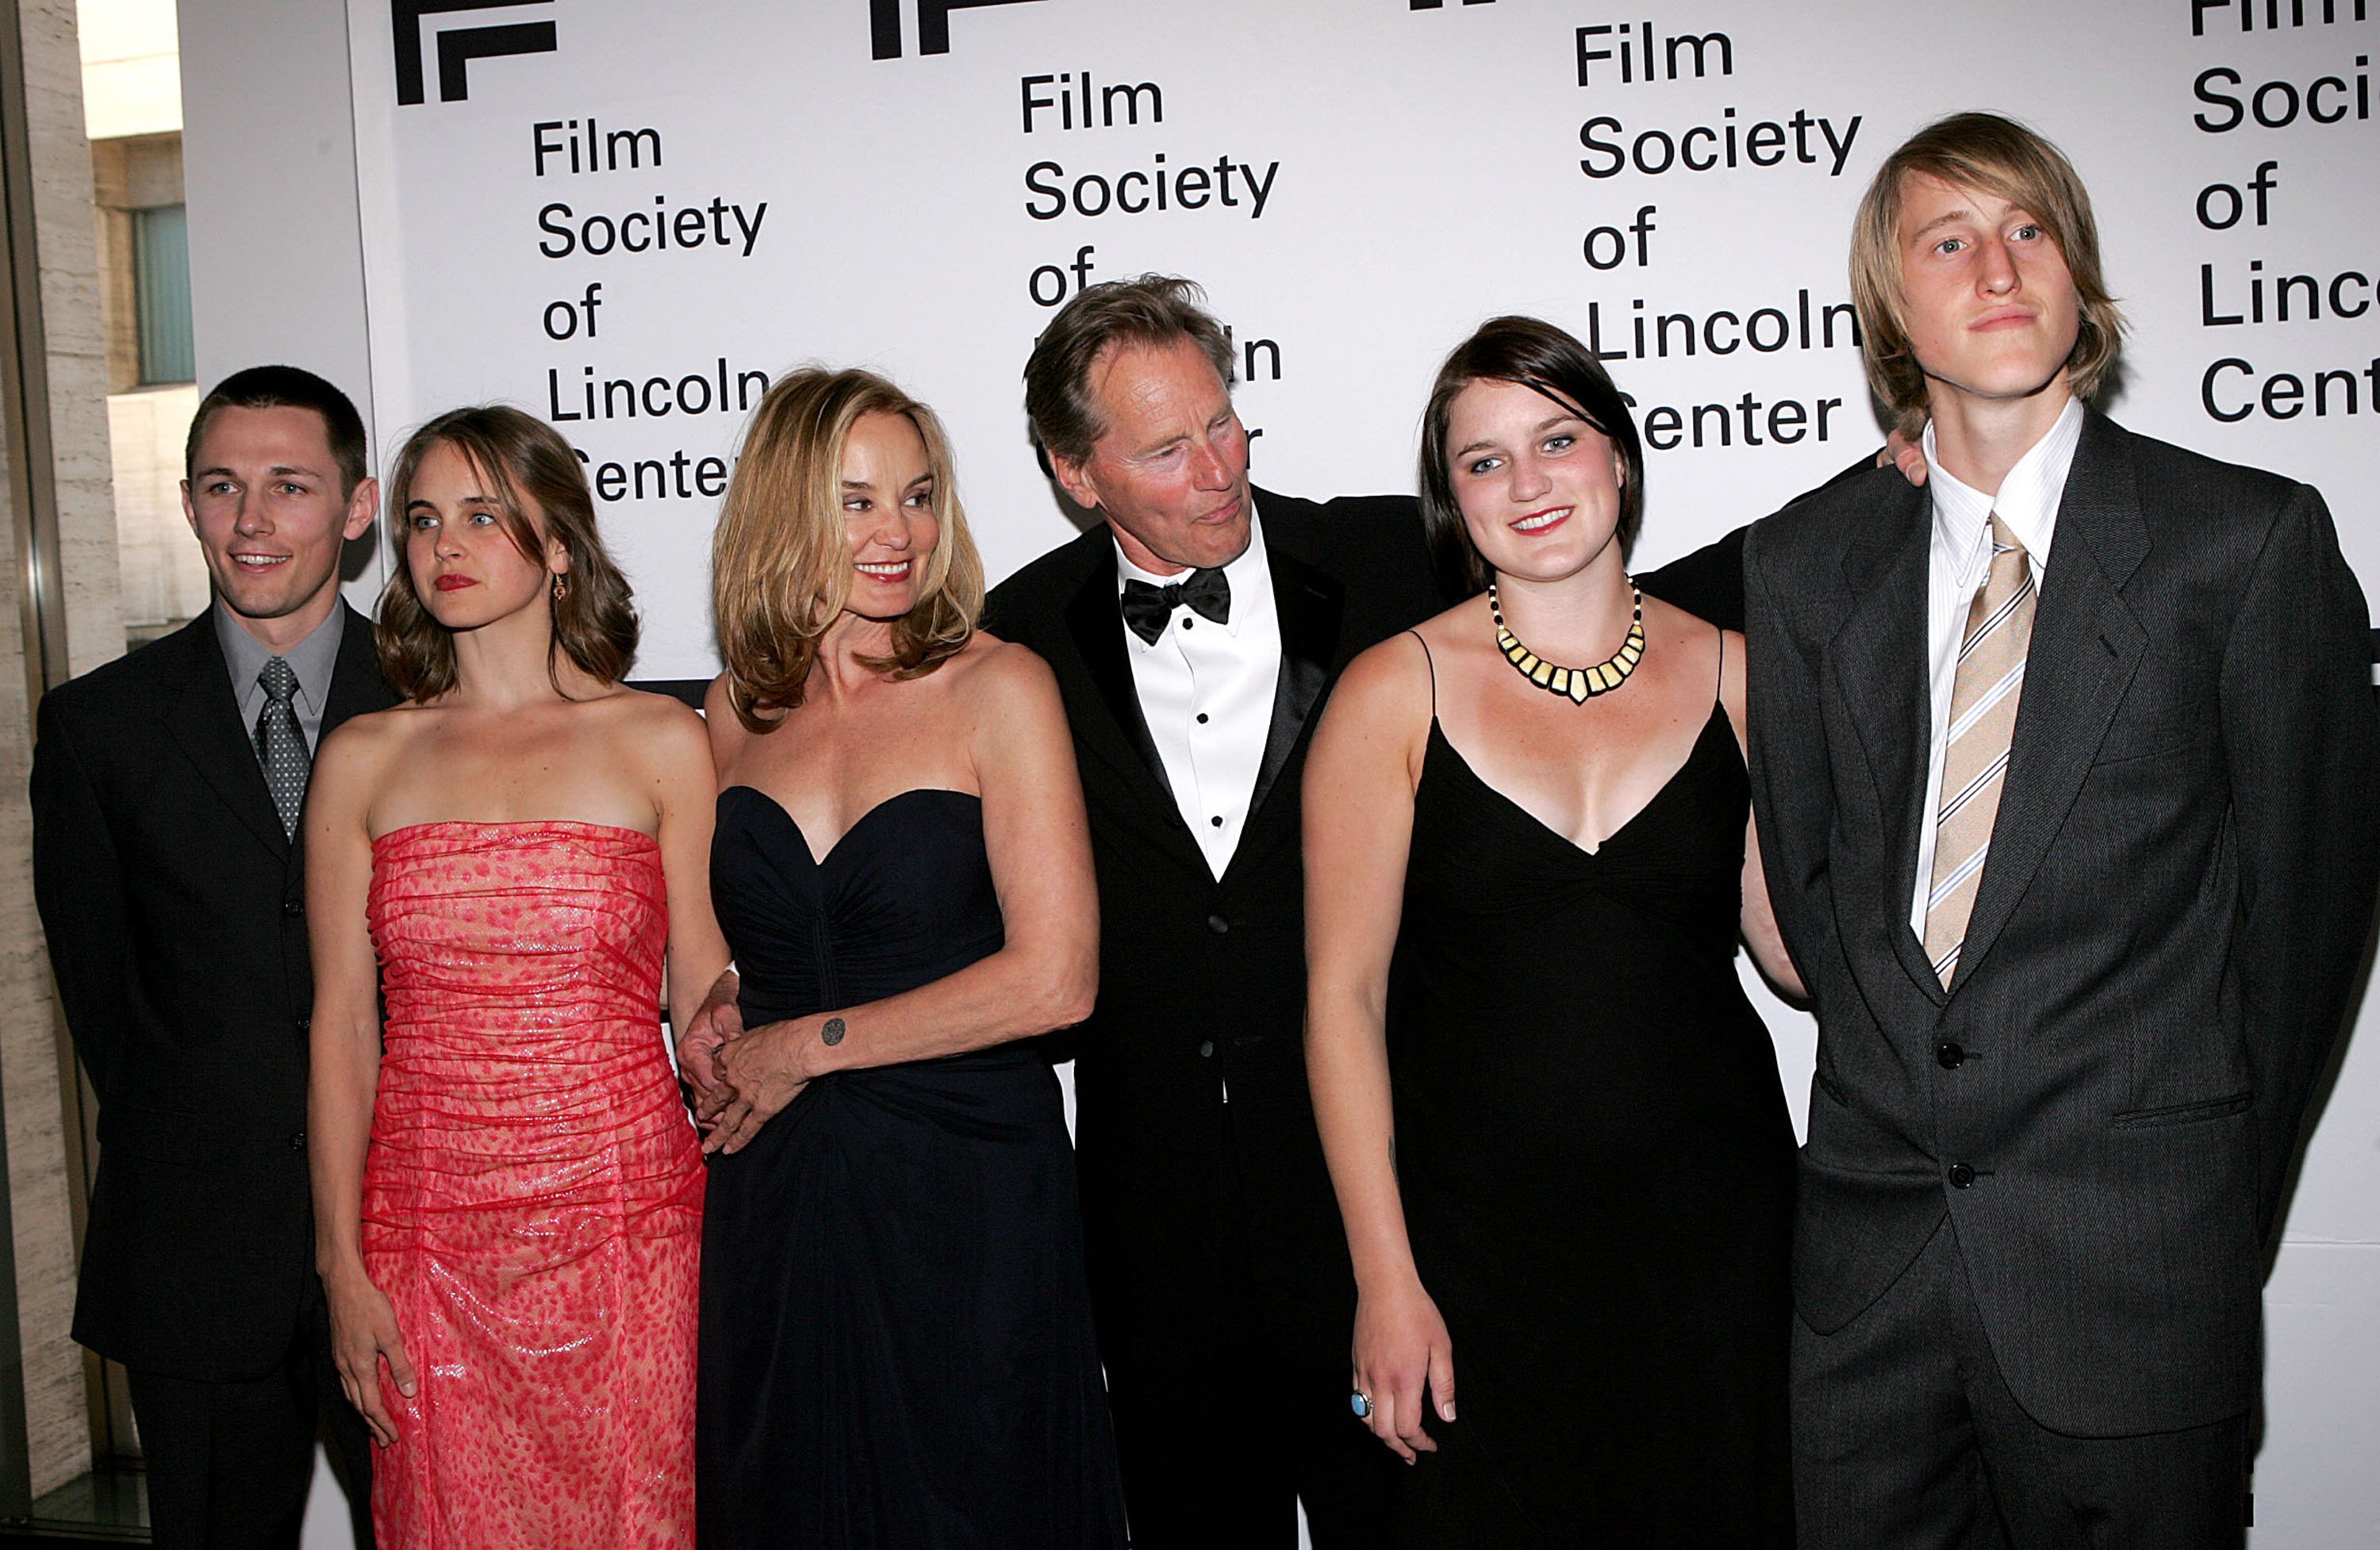 Actor Sam Shepard and actress Jessica Lange (C) pose with family members Shura Baryshnikov (2nd L), her husband Bruce Bryan (L), Hanna Shepard and Walker Shepard (R) attend a cermony honoring Lang at the Film Society of Lincoln Center at Avery Fisher Hall April 17, 2006 in New York City. | Source: Getty Images